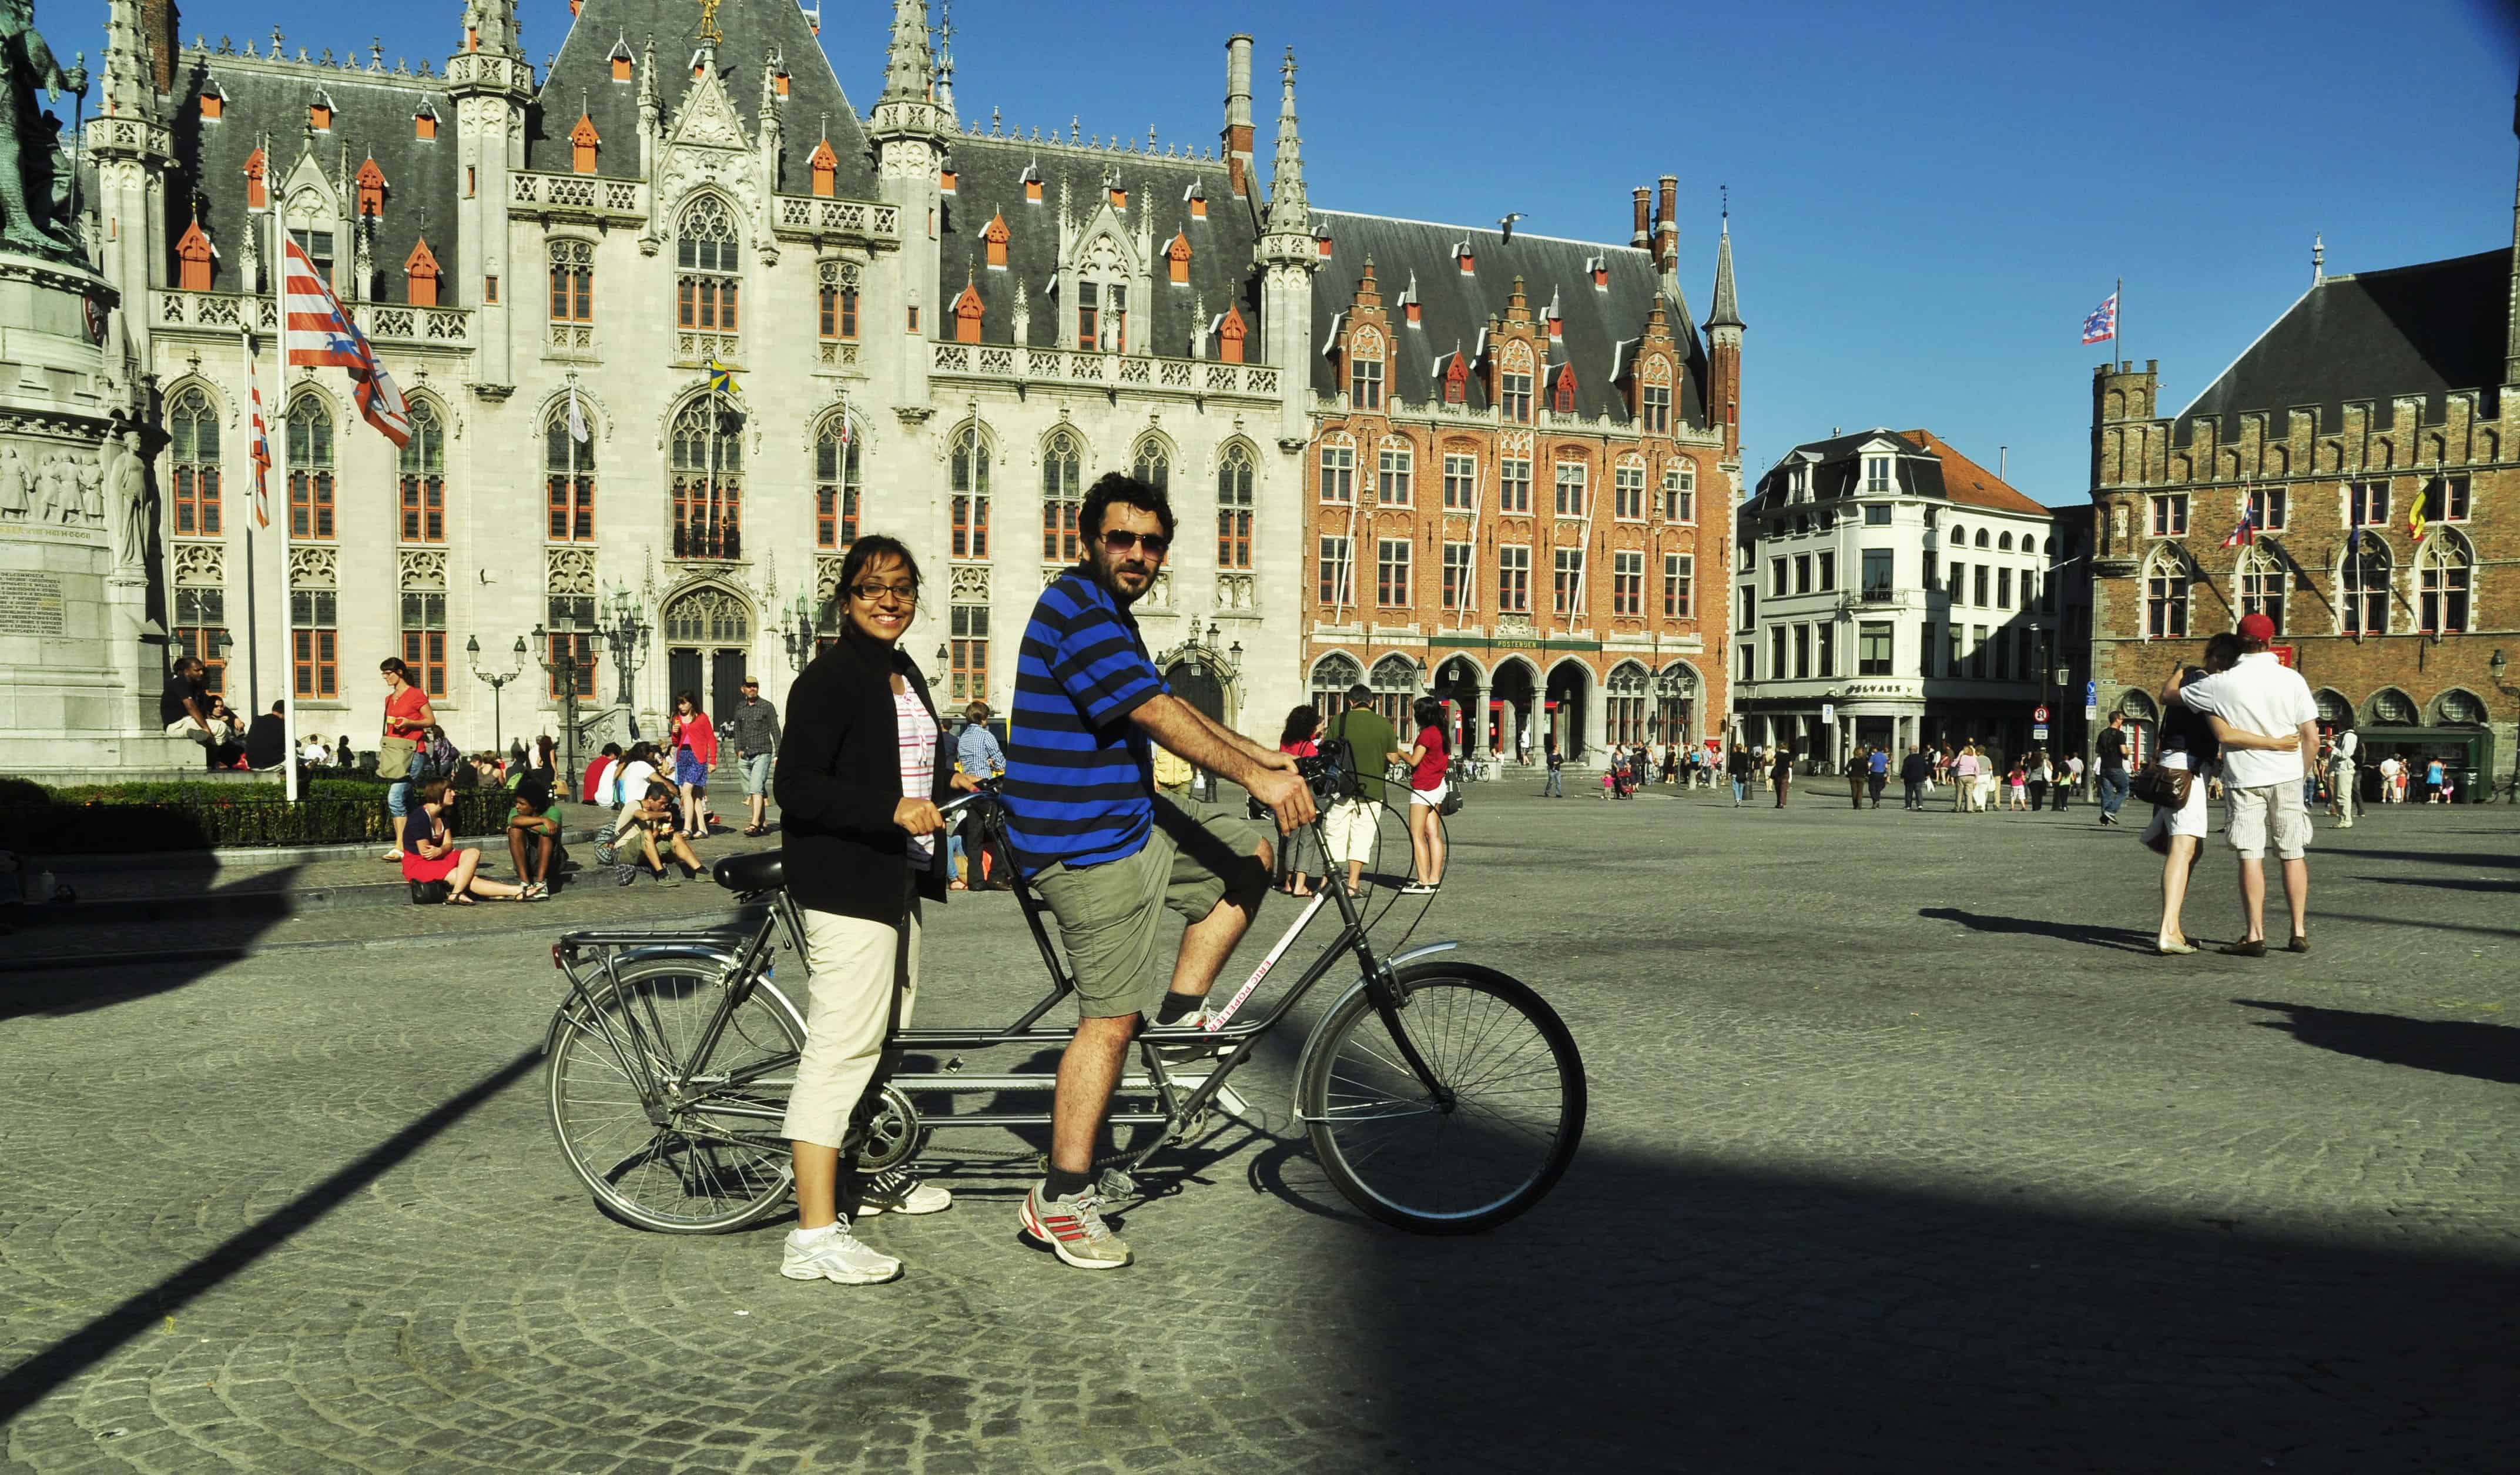 Vikram and Ishwinder from Empty Rusacks riding a tandem bike in Europe